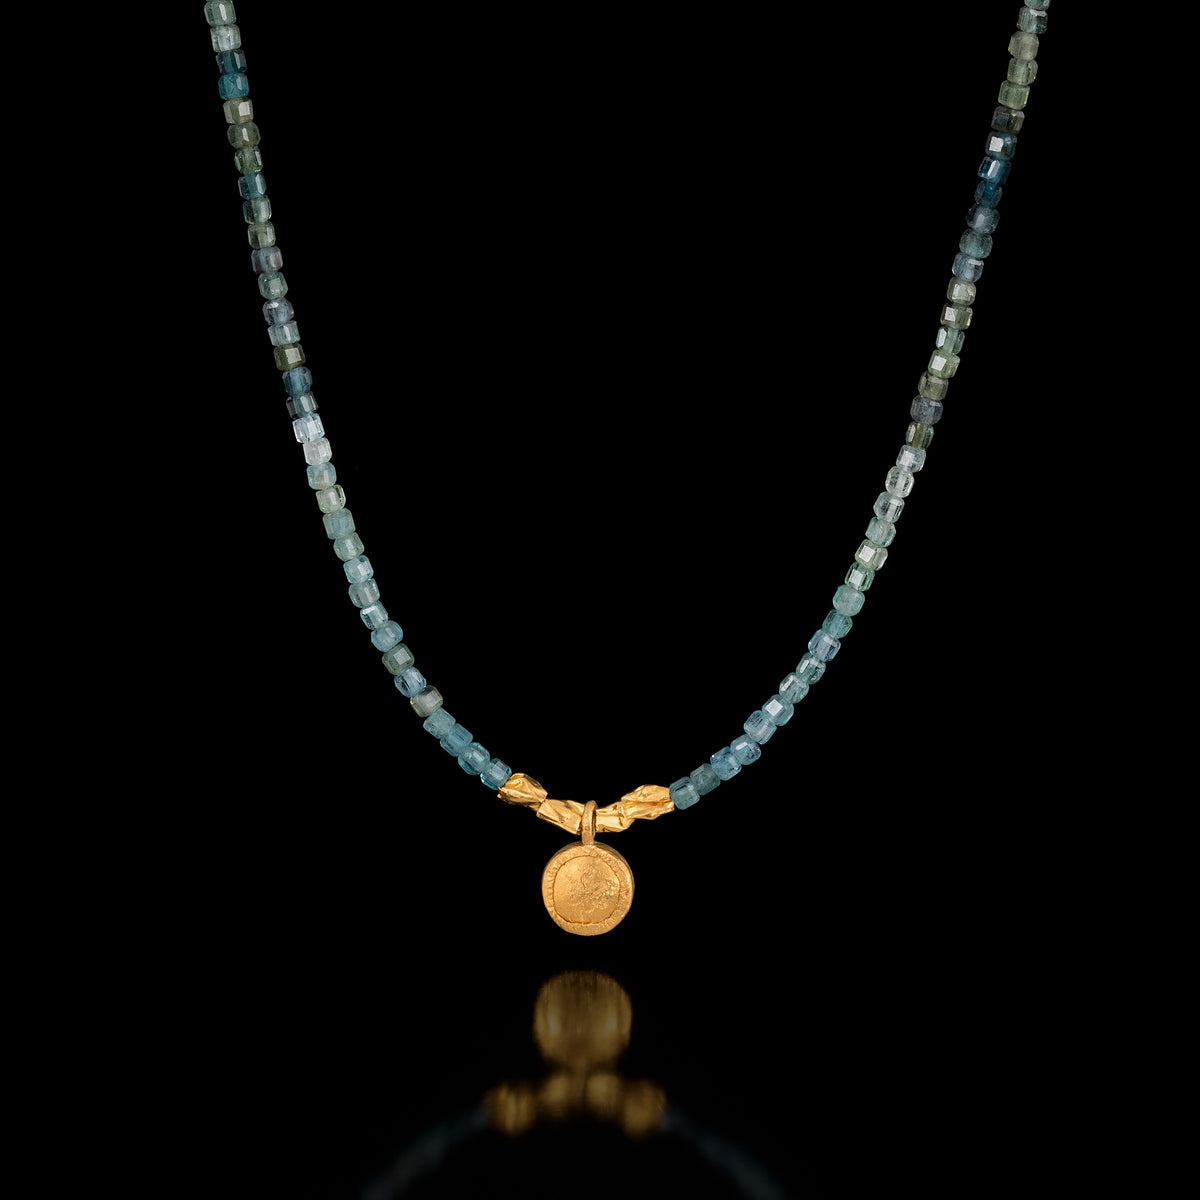 Tourmaline Necklace with A Round 24K Pendant